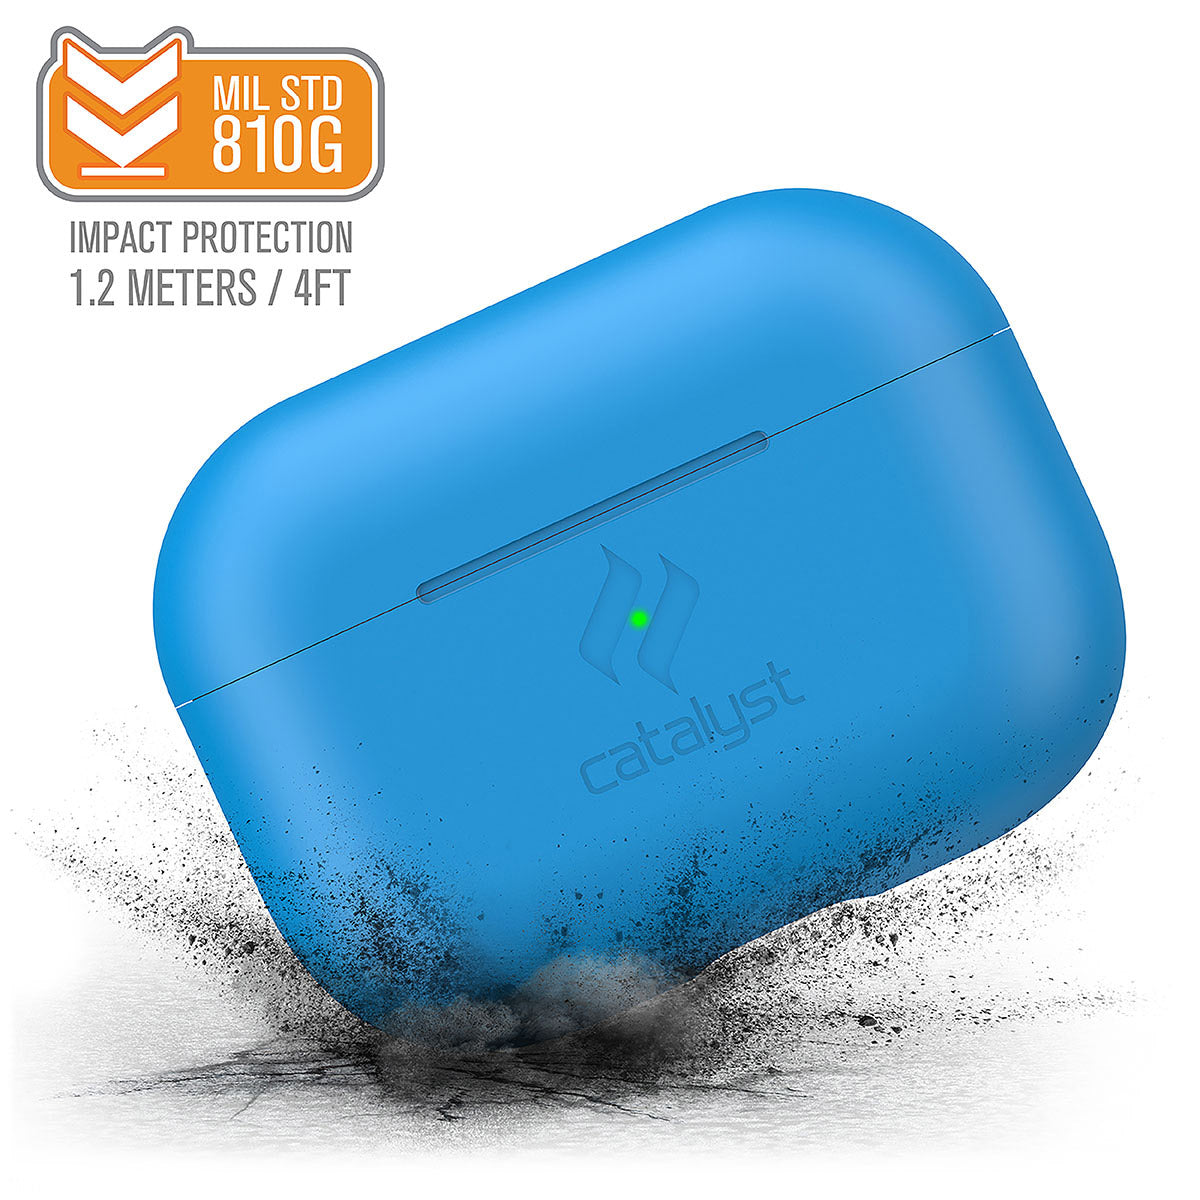 Catalyst airpods pro gen 2/1 slim case showing how drop proof the case is in a neon blue text reads MIL STD 810G impact protection 1.2 meters/4FT 